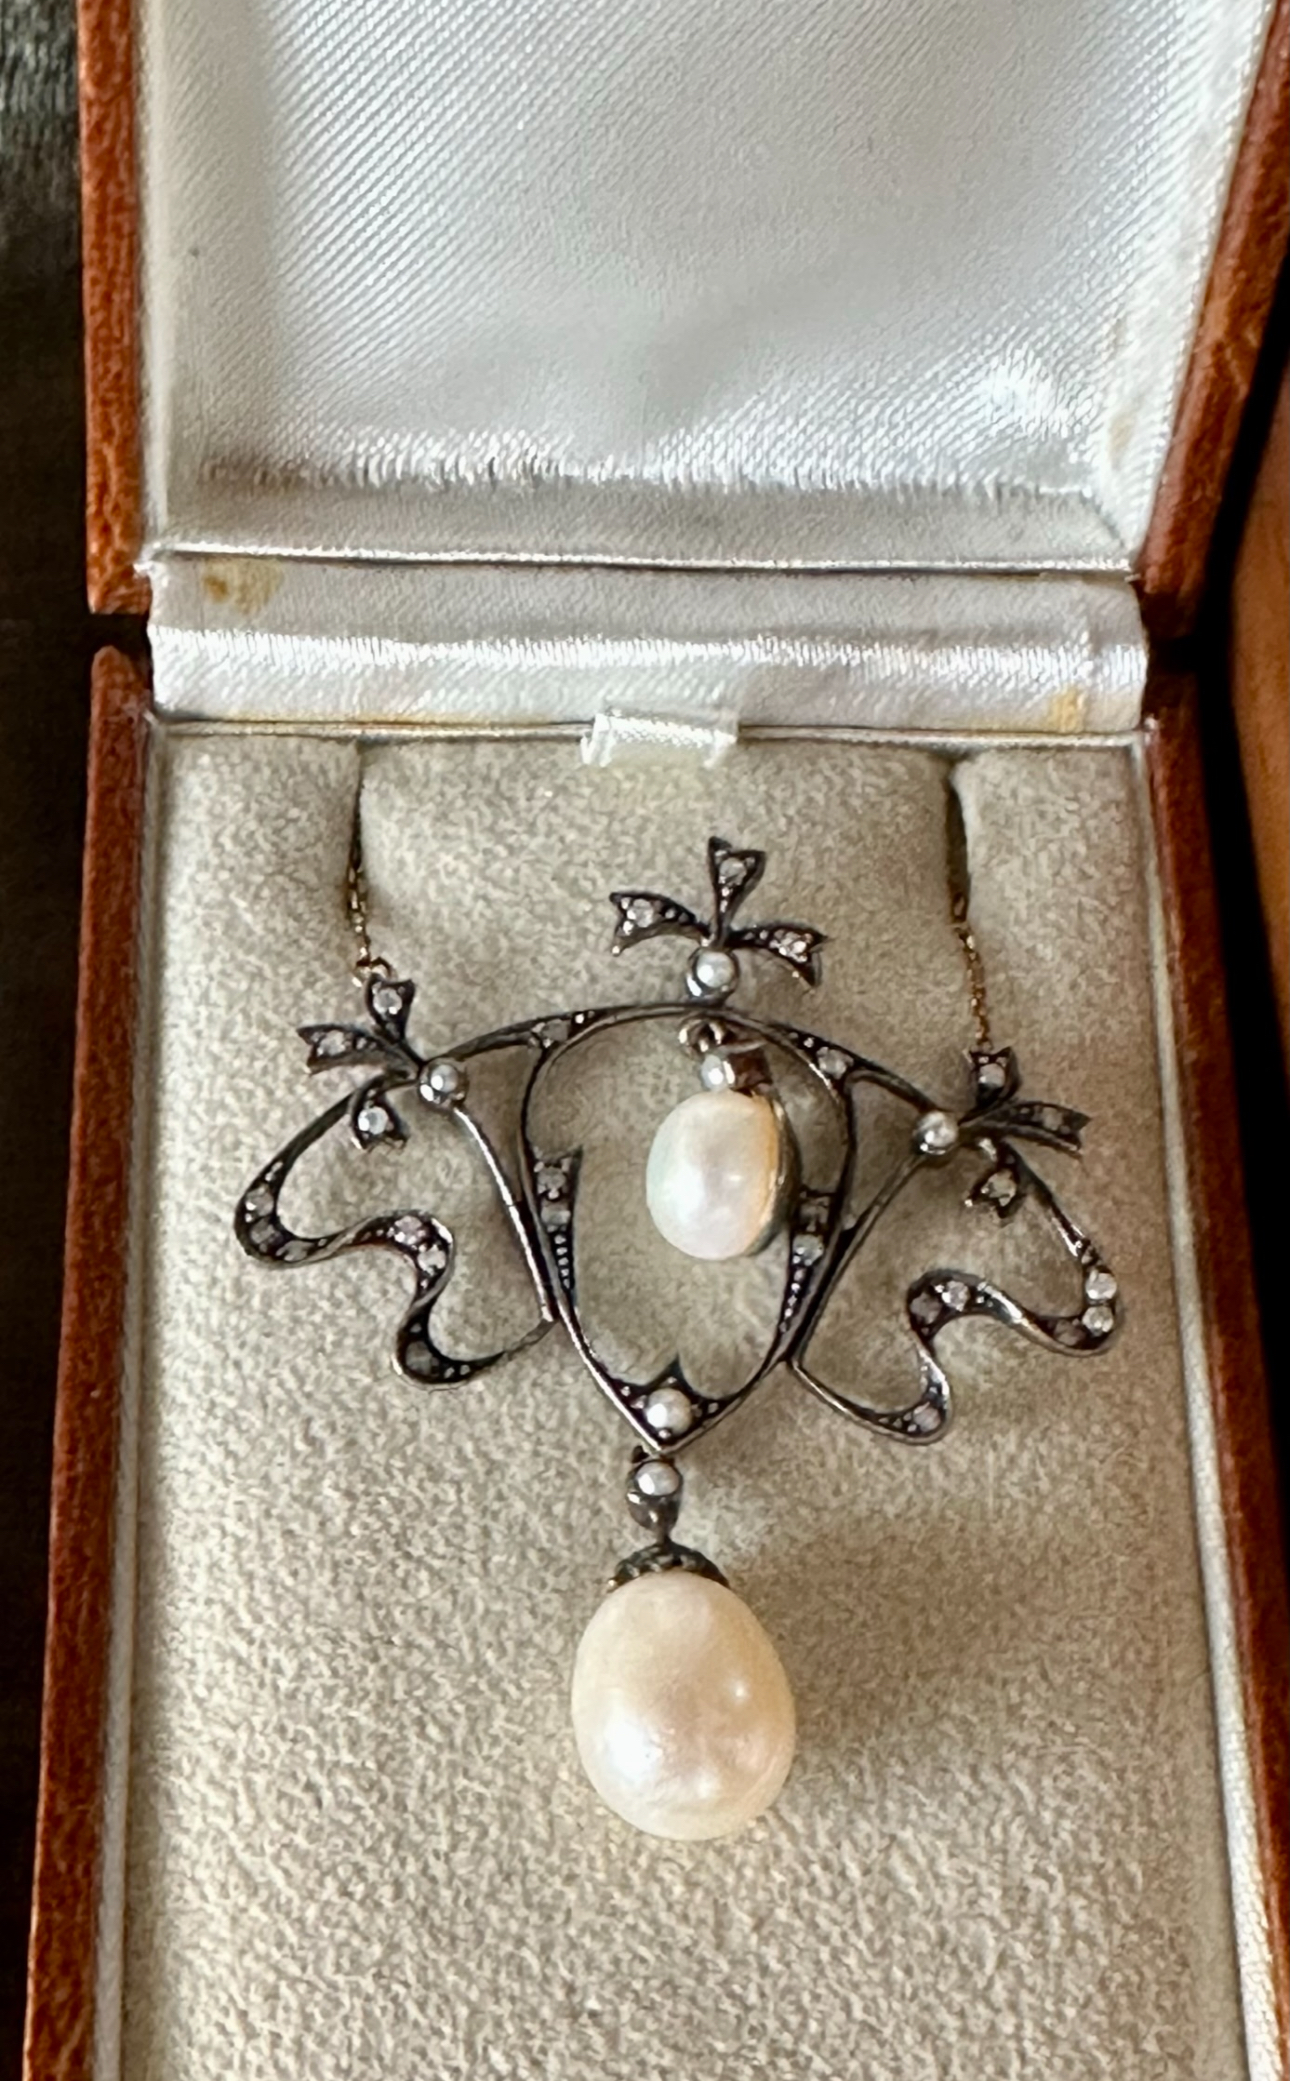 Ornate necklace with diamonds and pearls